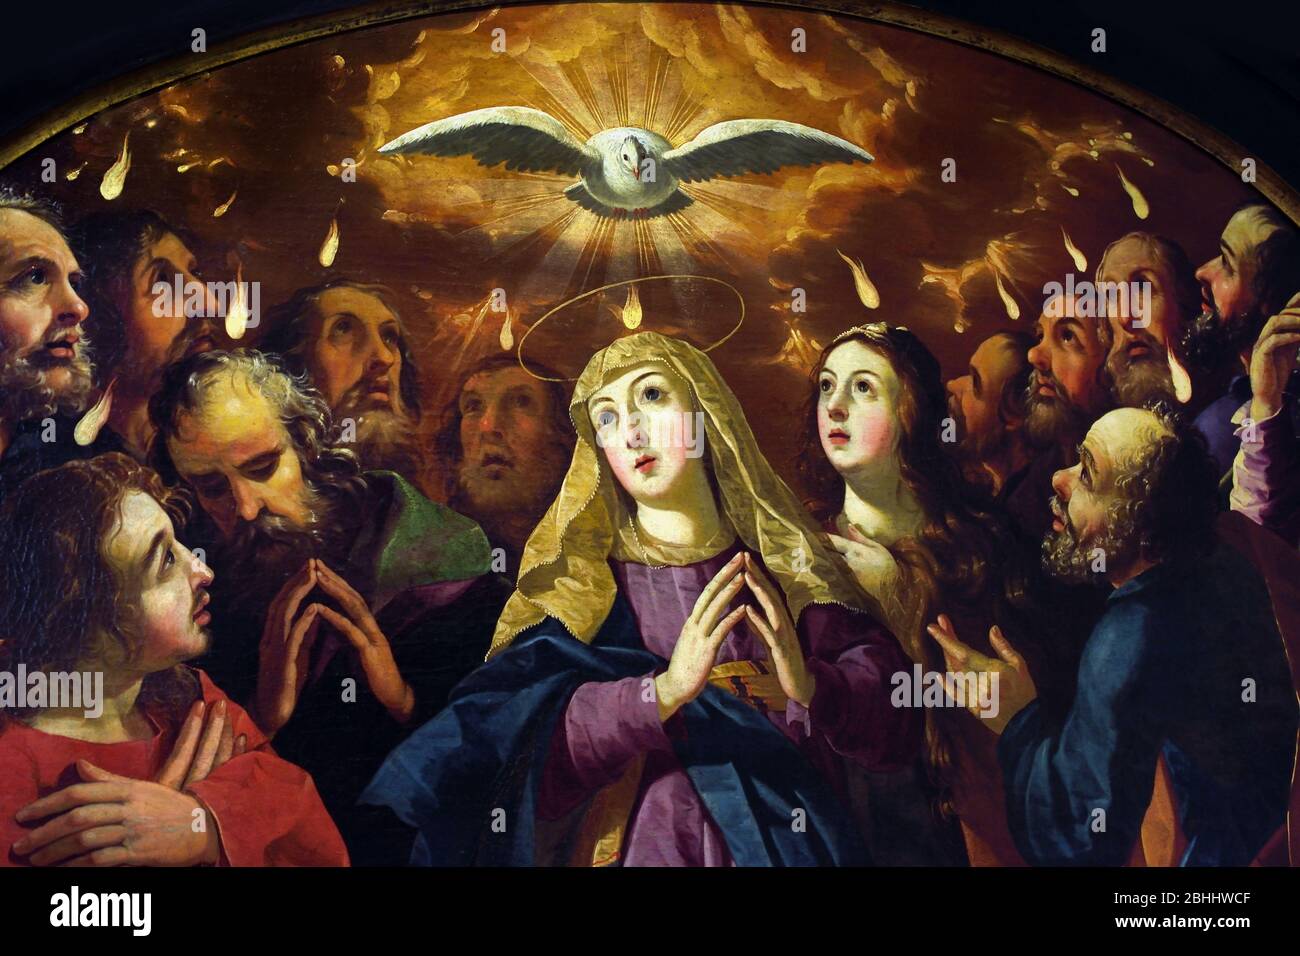 Pentecostes - Pentecost 1650-1660 Josefa d` Obidos - Josefa de Ayala Cabreira 1630-1684  Se de Coimbra Portugal,Portuguese, ( The Christian holiday of Pentecost, which is celebrated on the seventh Sunday (49 days) after Easter, commemorates the descent of the Holy Spirit upon the Apostles and other followers of Jesus Christ while they were in Jerusalem celebrating the Feast of Weeks, as described in the Acts of the Apostles (Acts 2:1–31). Some Christians believe this event represents the birth of the Catholic Church. ) Stock Photo